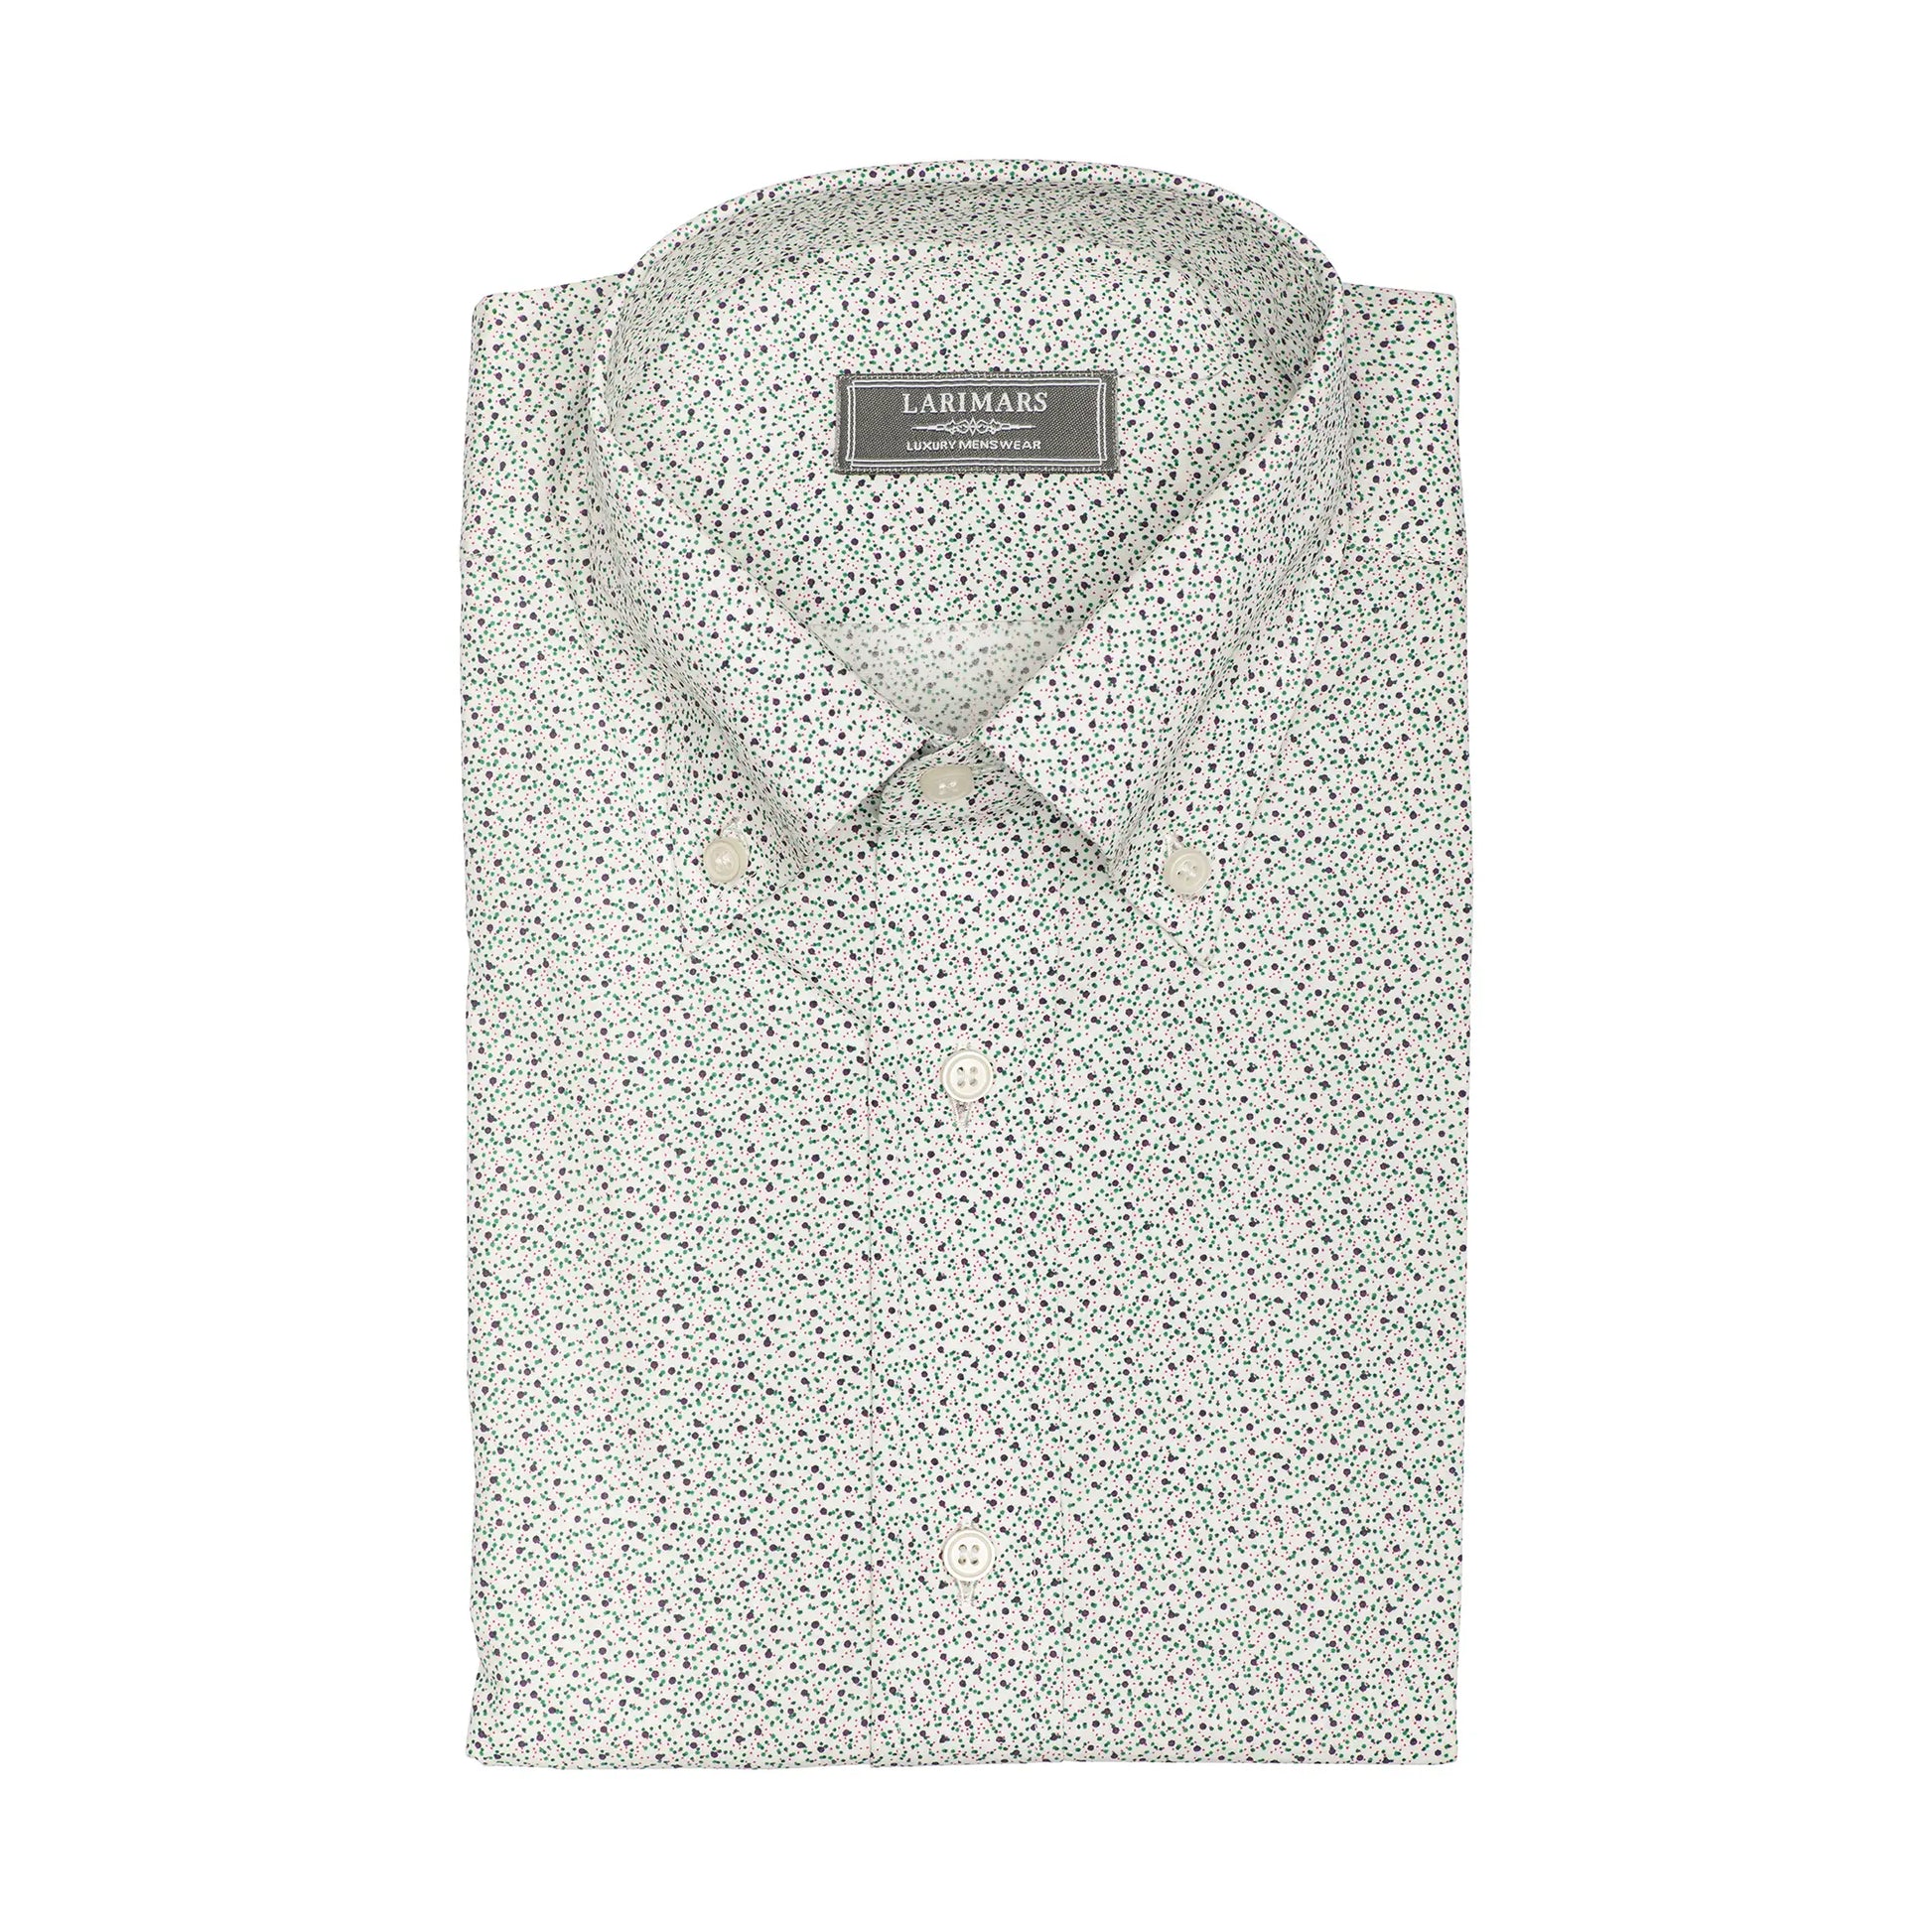 Multi Color Dot Print | Short Sleeves - Larimars Clothing Men's Formal and casual wear shirts